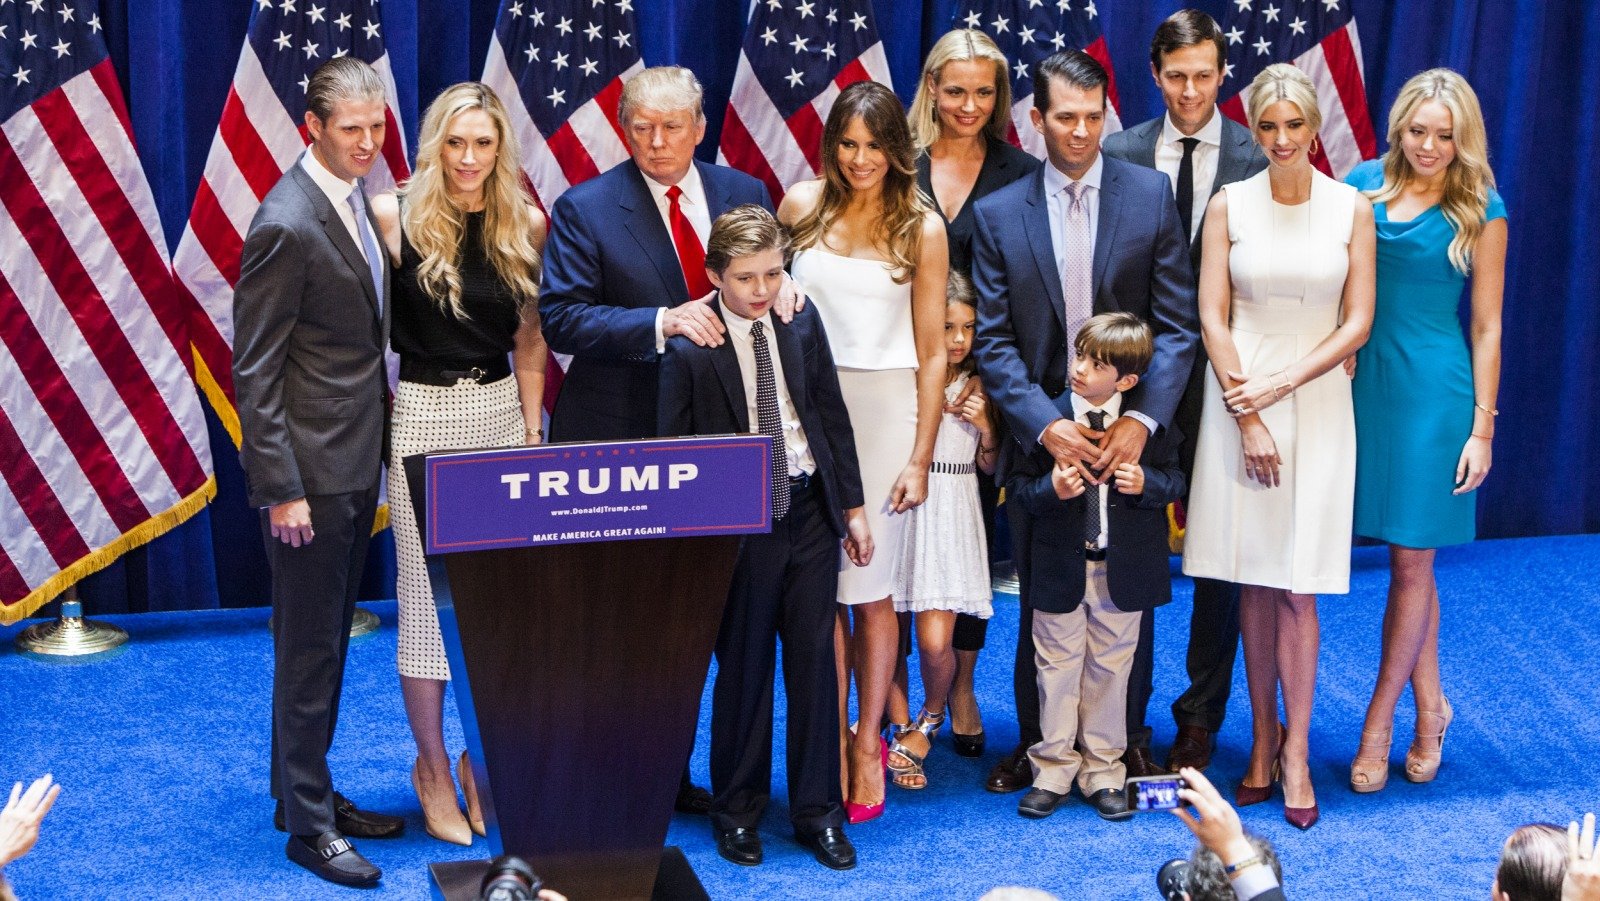 The Truth About Barron Trump's Relationship With His Siblings